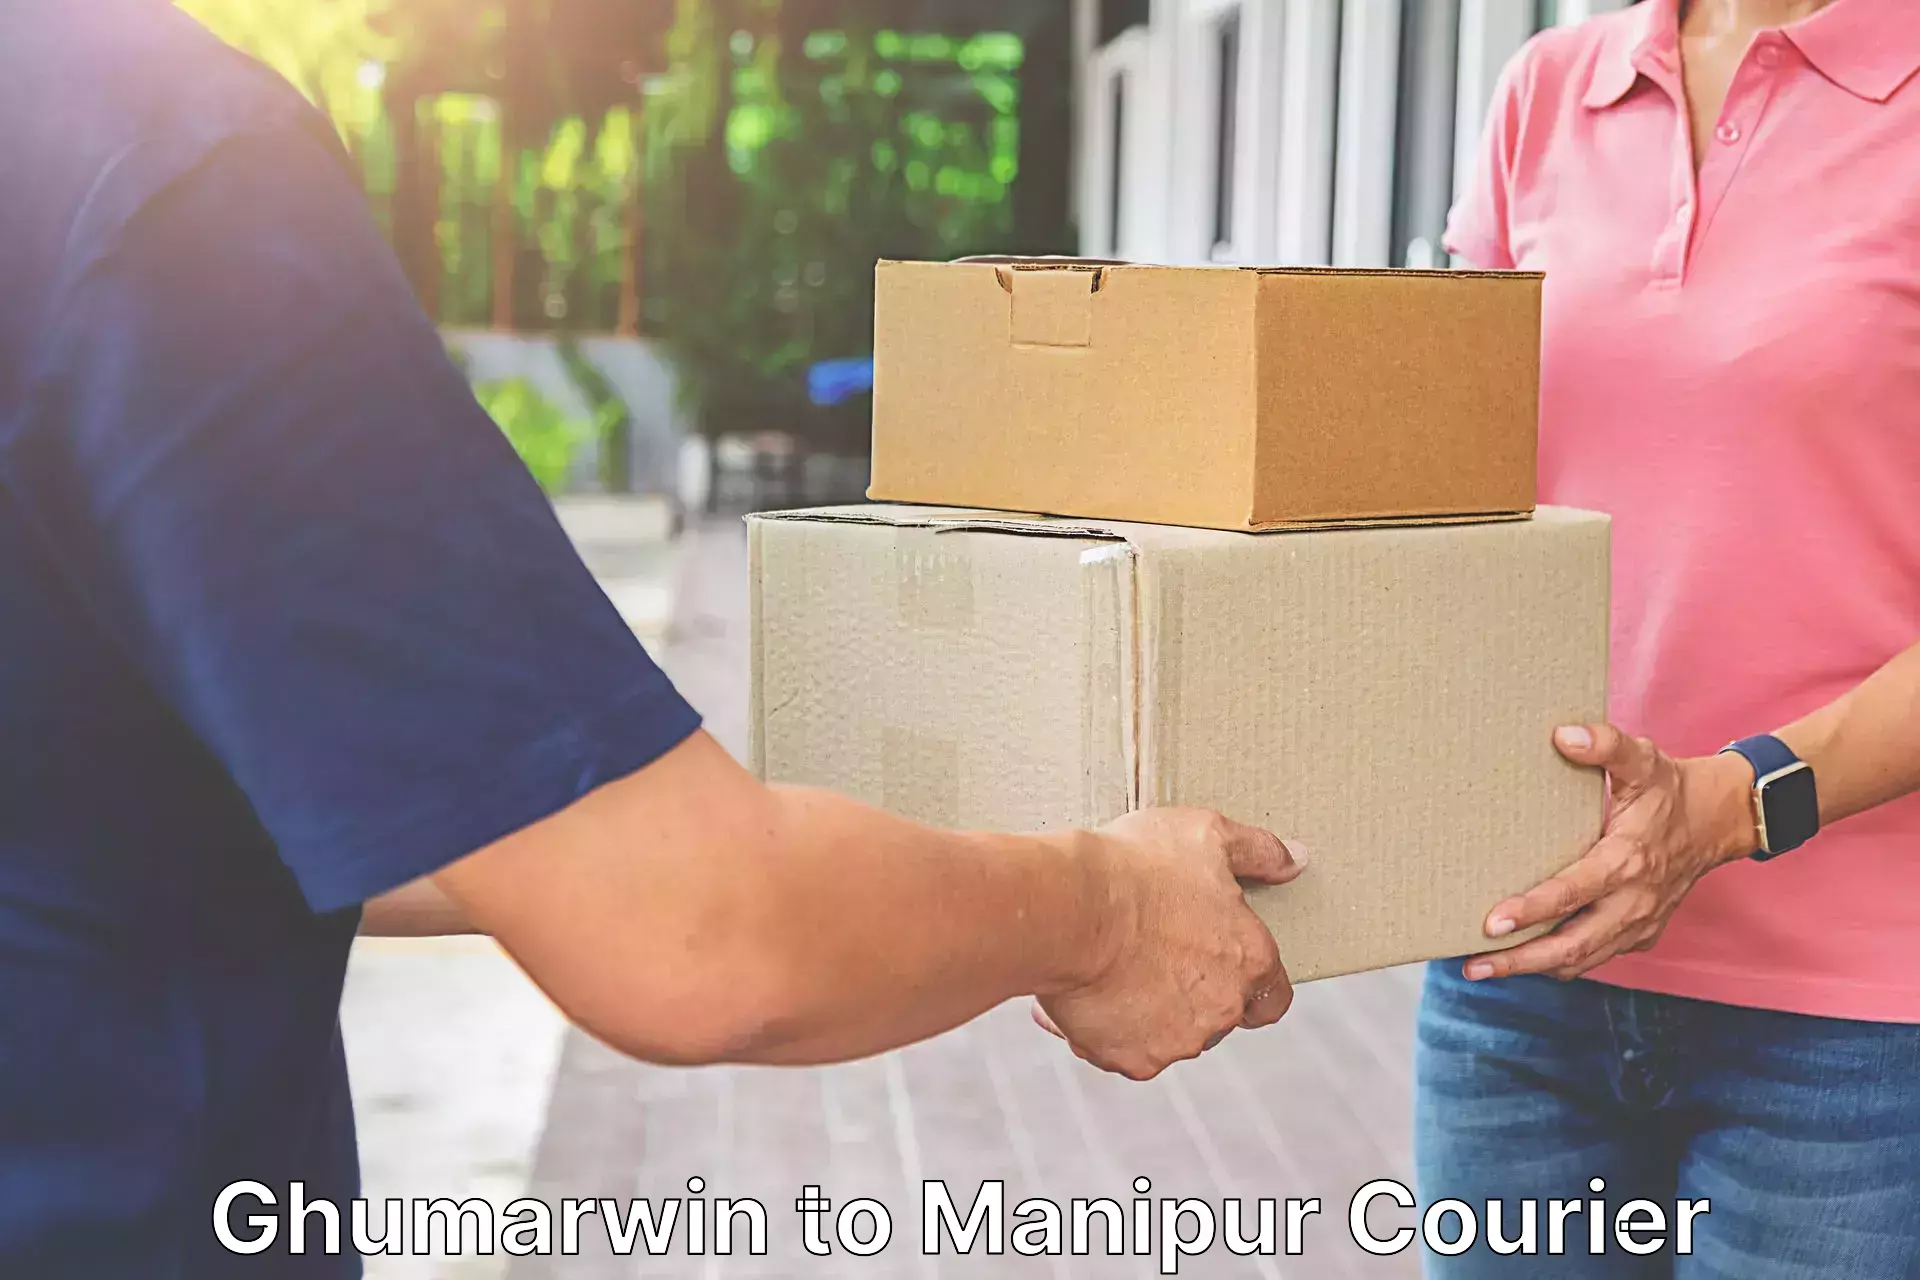 Cash on delivery service Ghumarwin to Manipur